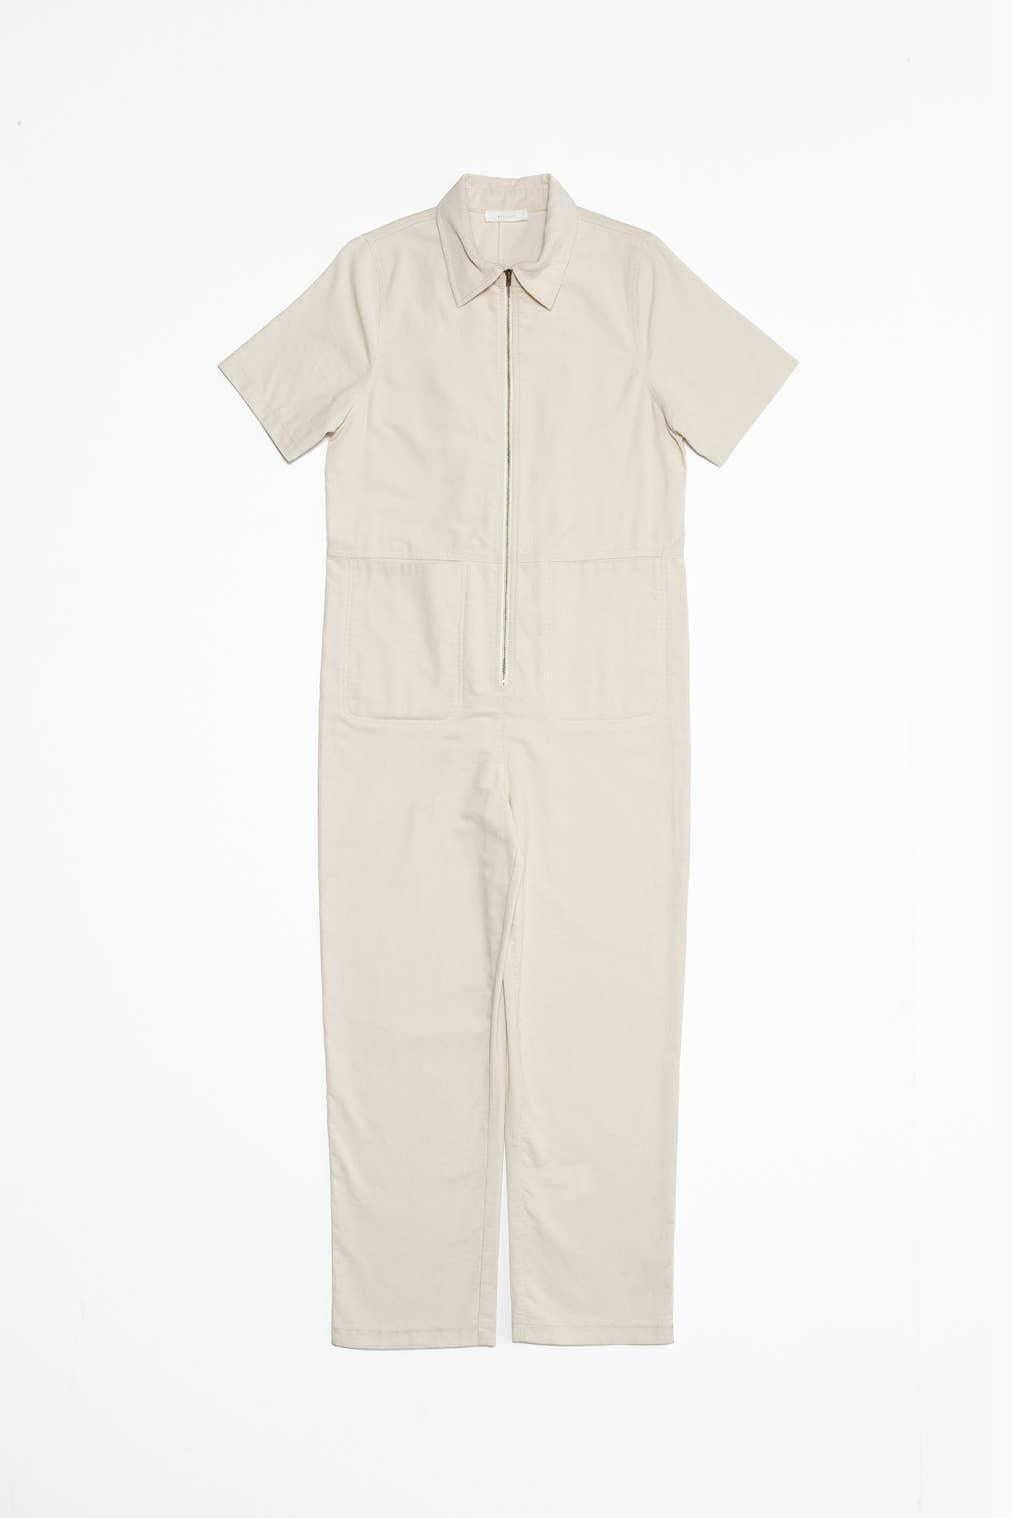 The Colby Jumpsuit